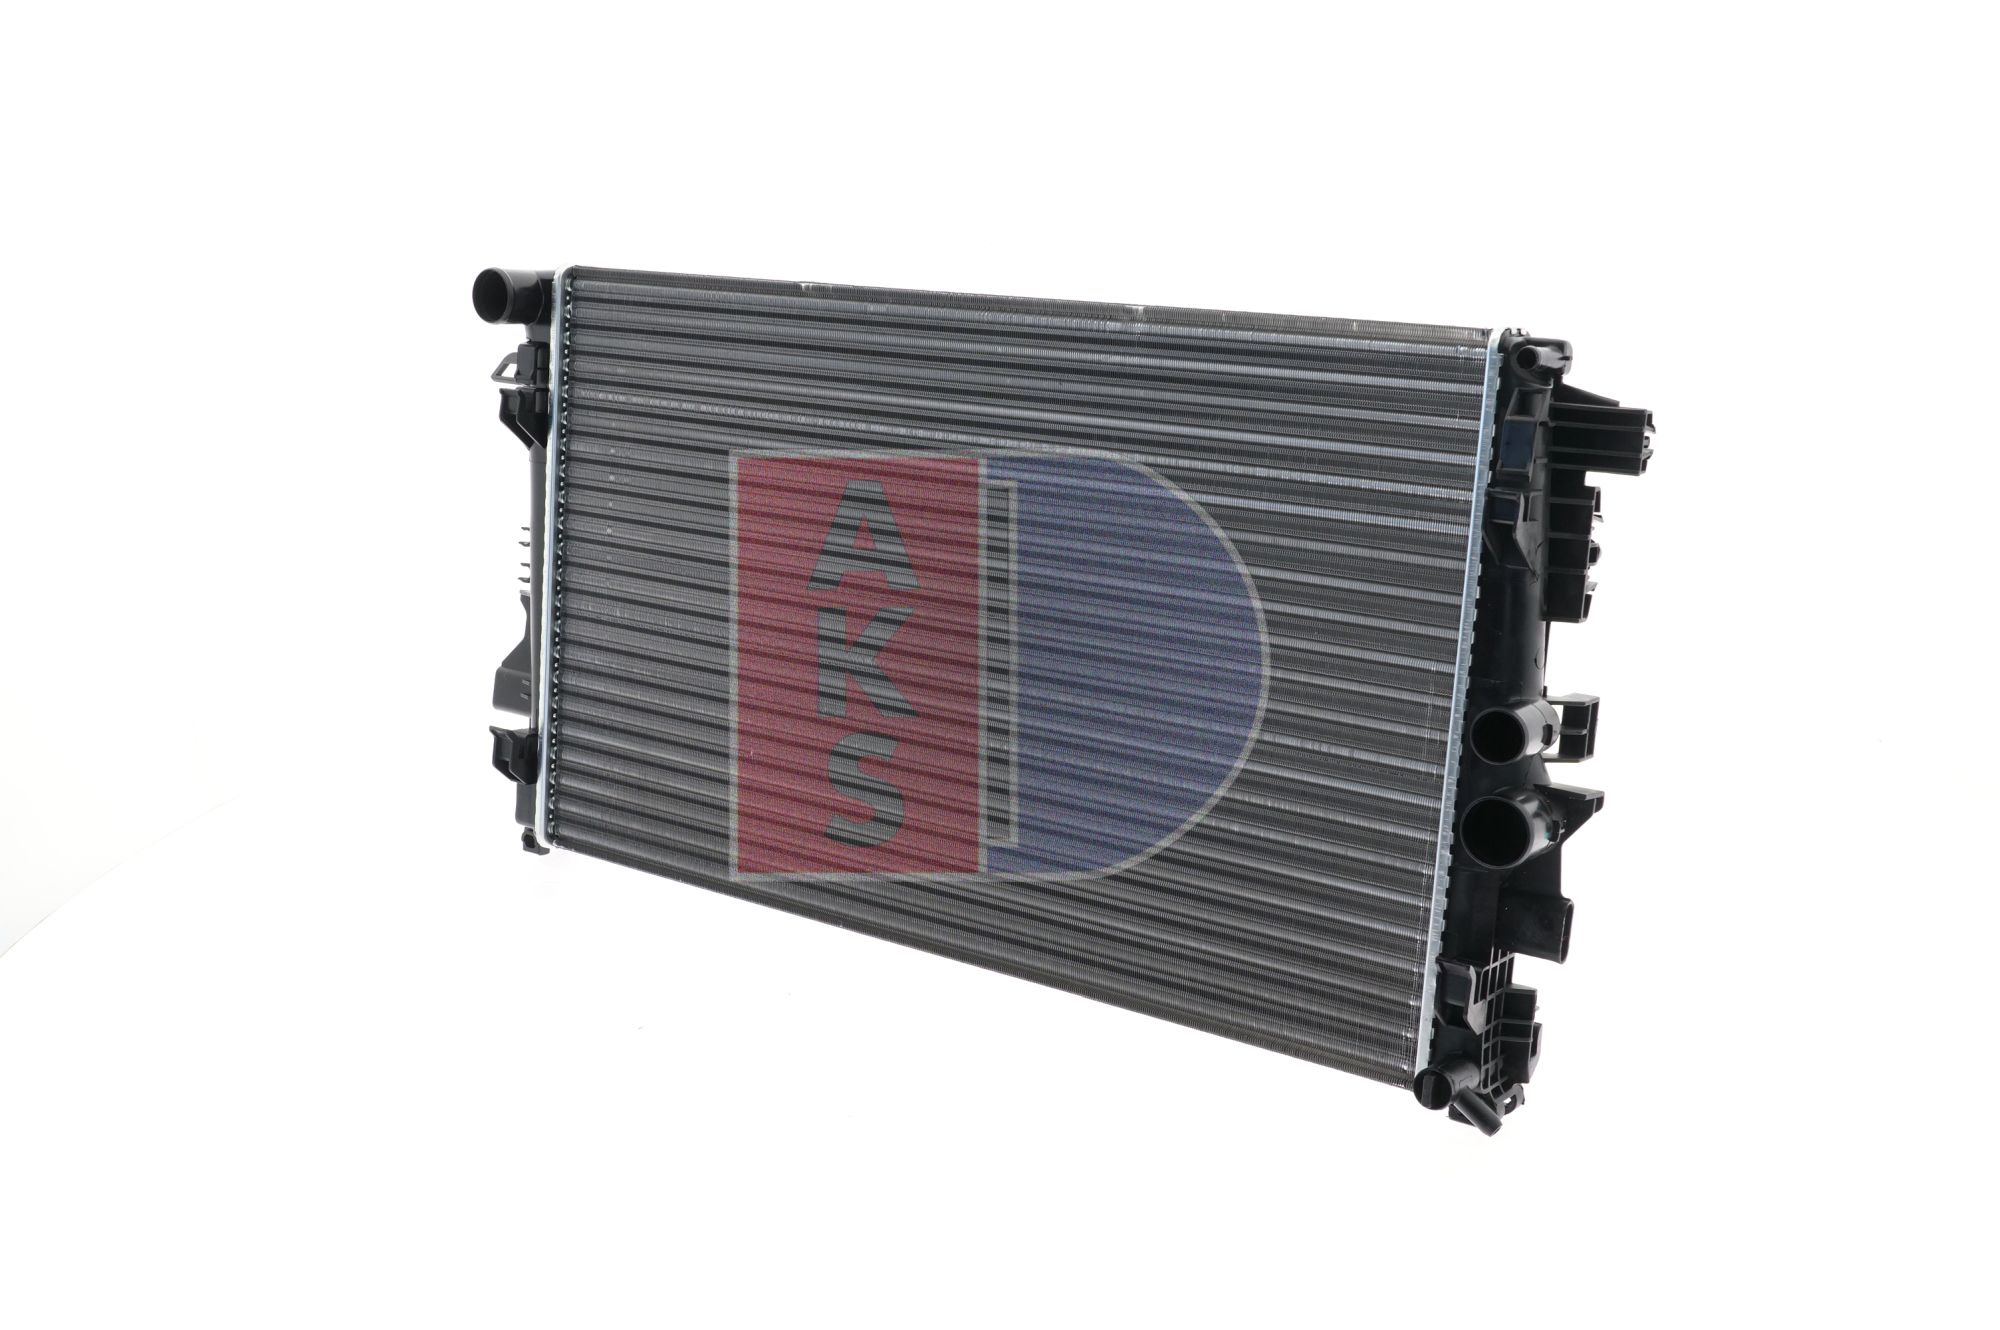 AKS DASIS 121000N Engine radiator 680 x 405 x 26 mm, Mechanically jointed cooling fins